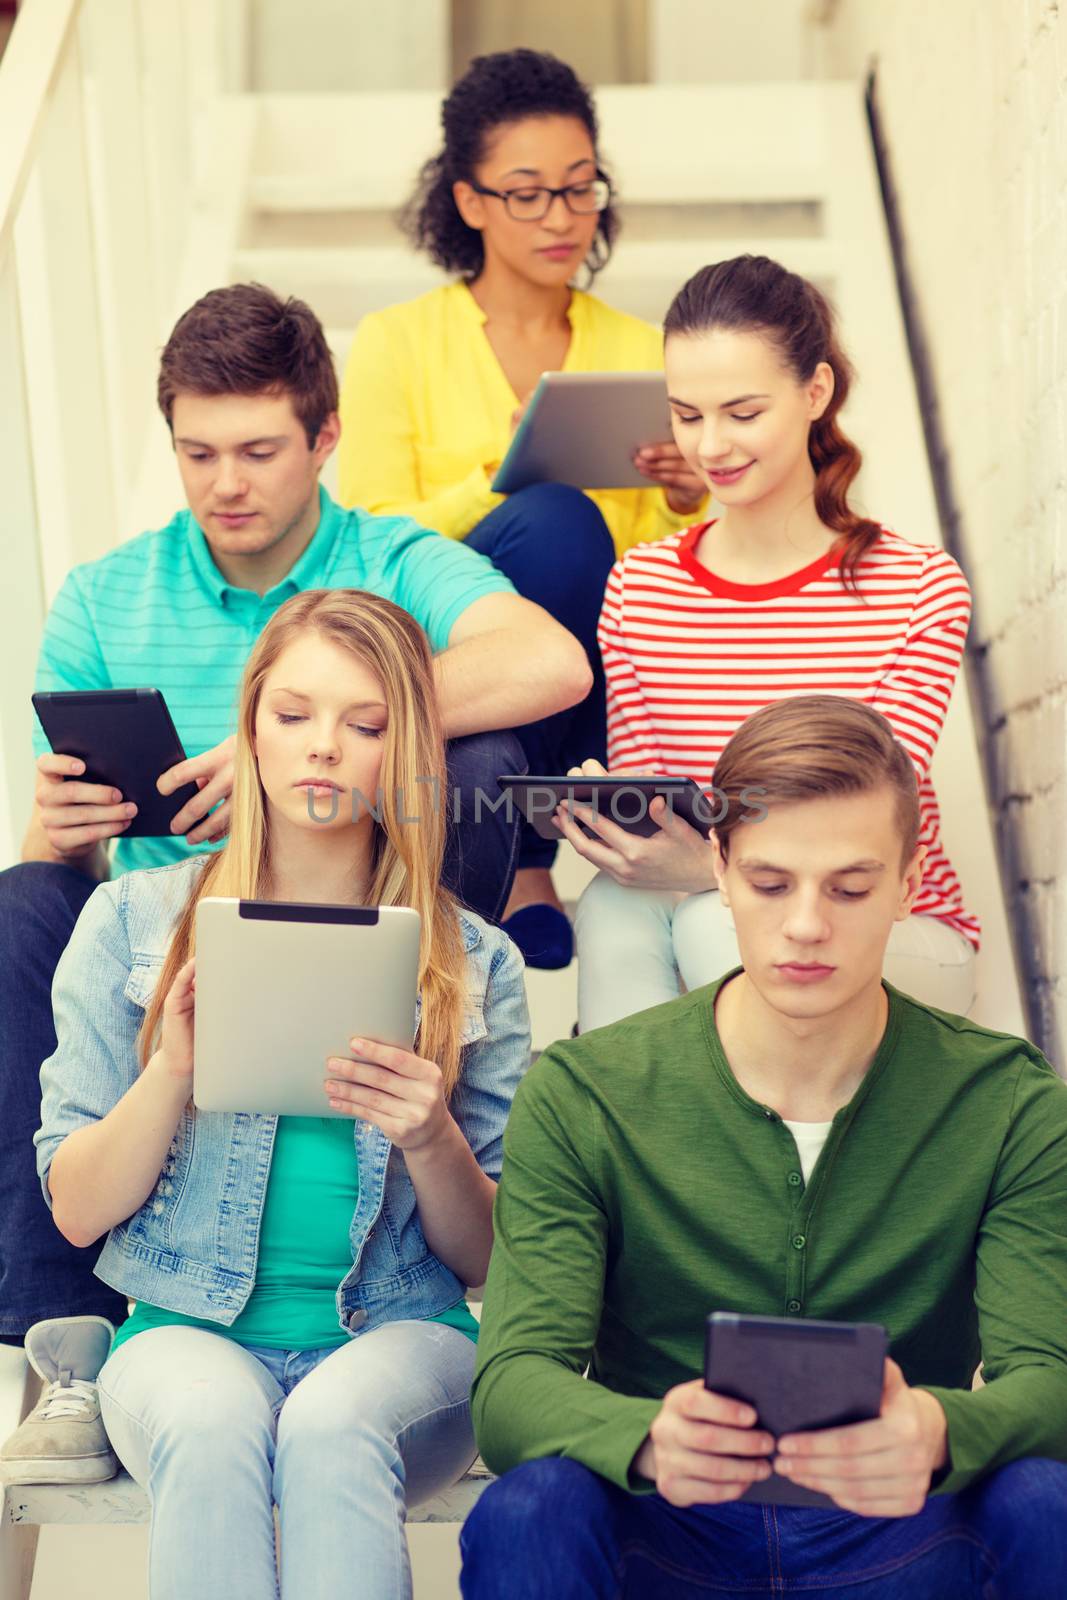 busy students with tablet pc computer by dolgachov